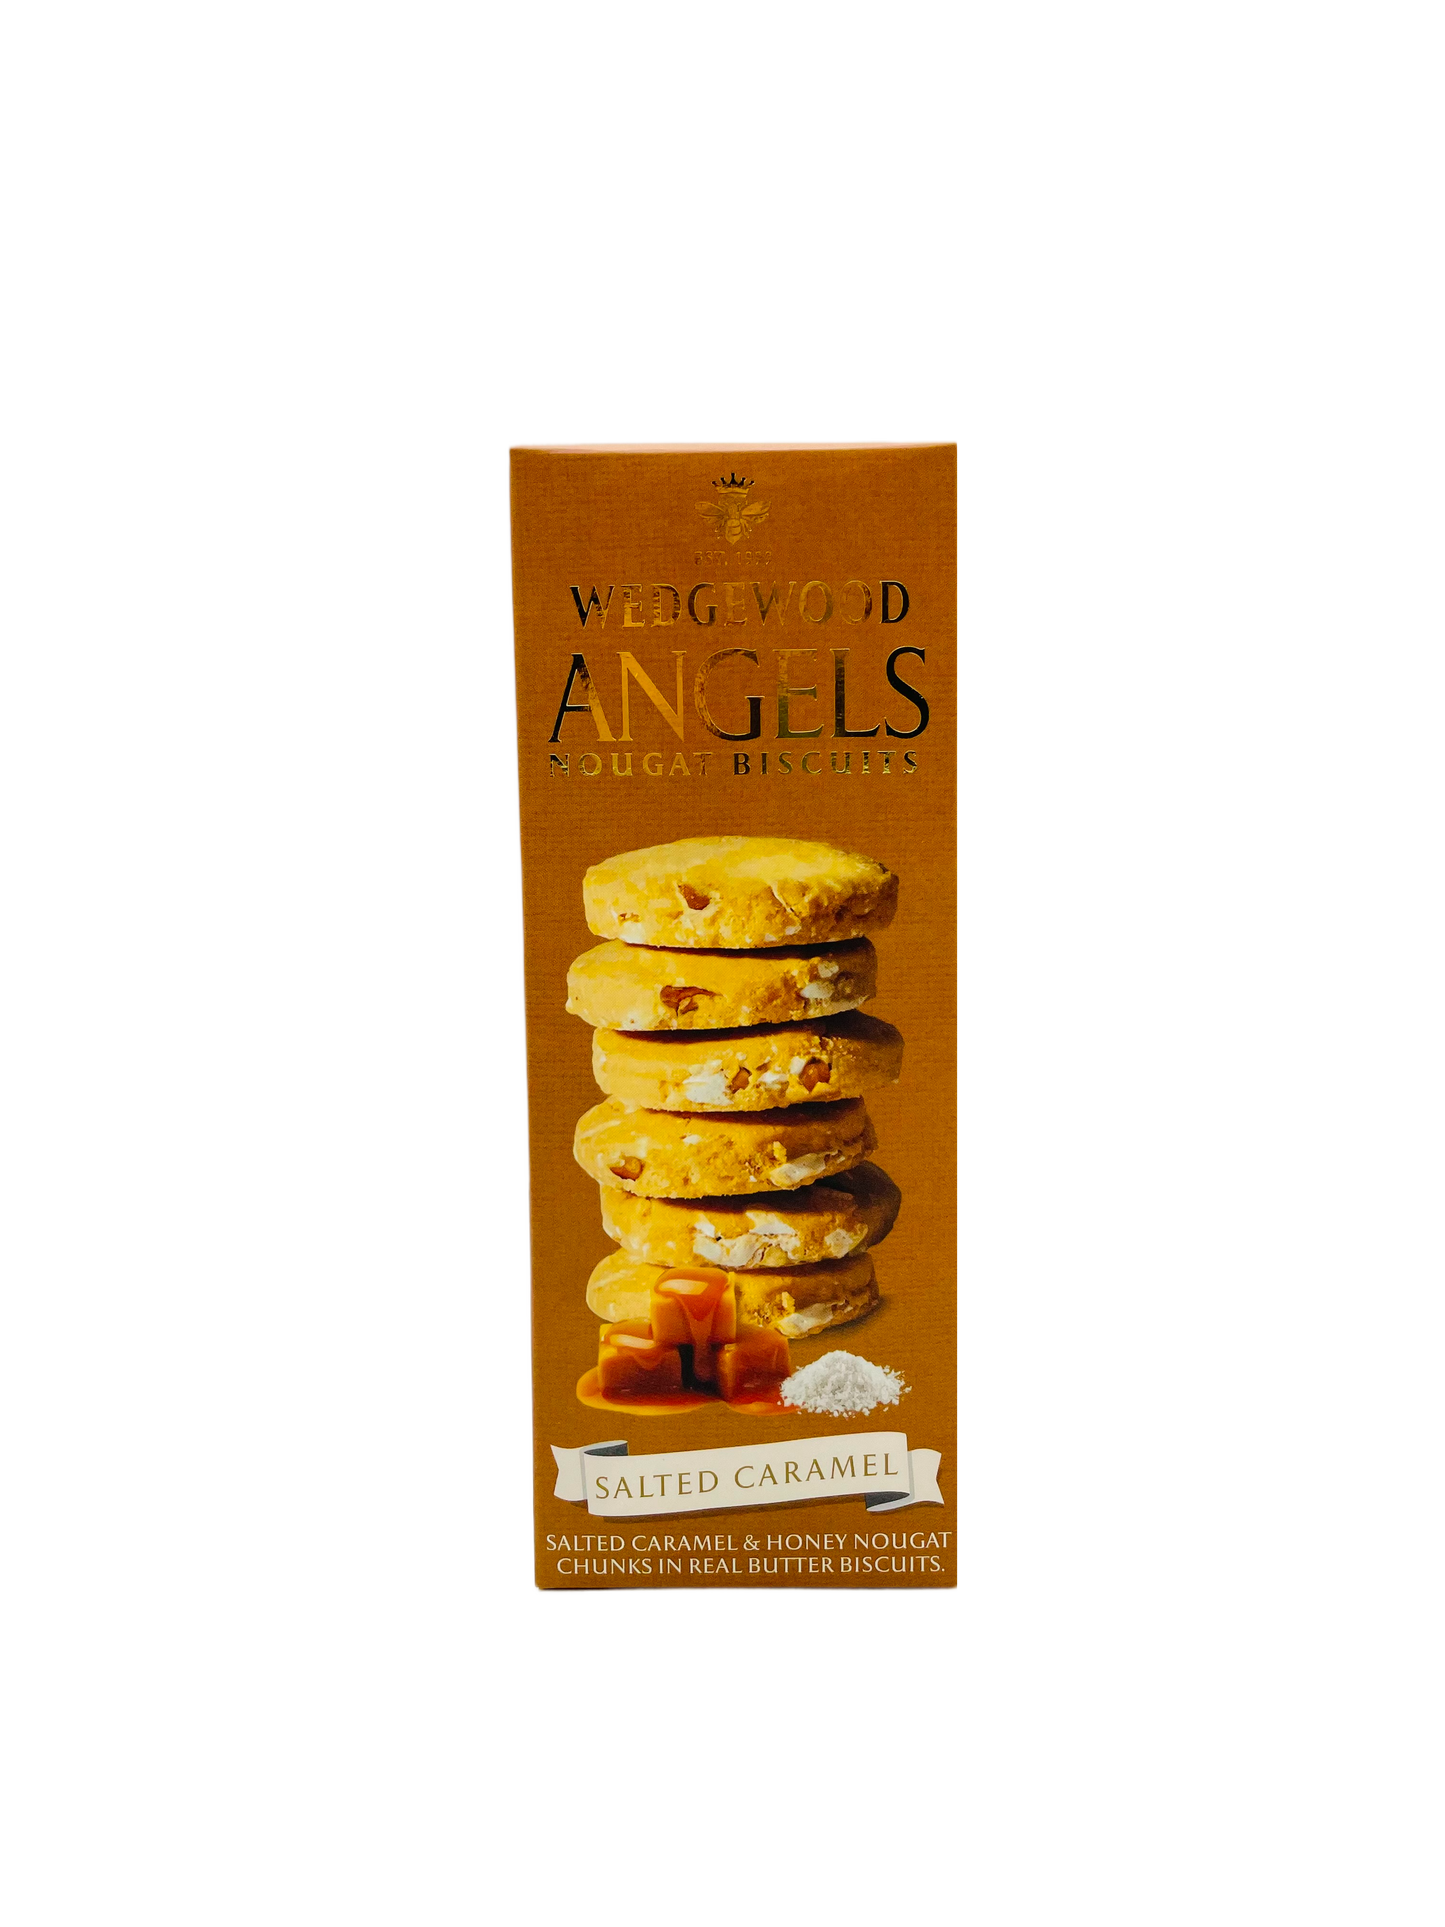 Wedgewood Angels Nougat Biscuits Salted Caramel Flavoured 150g